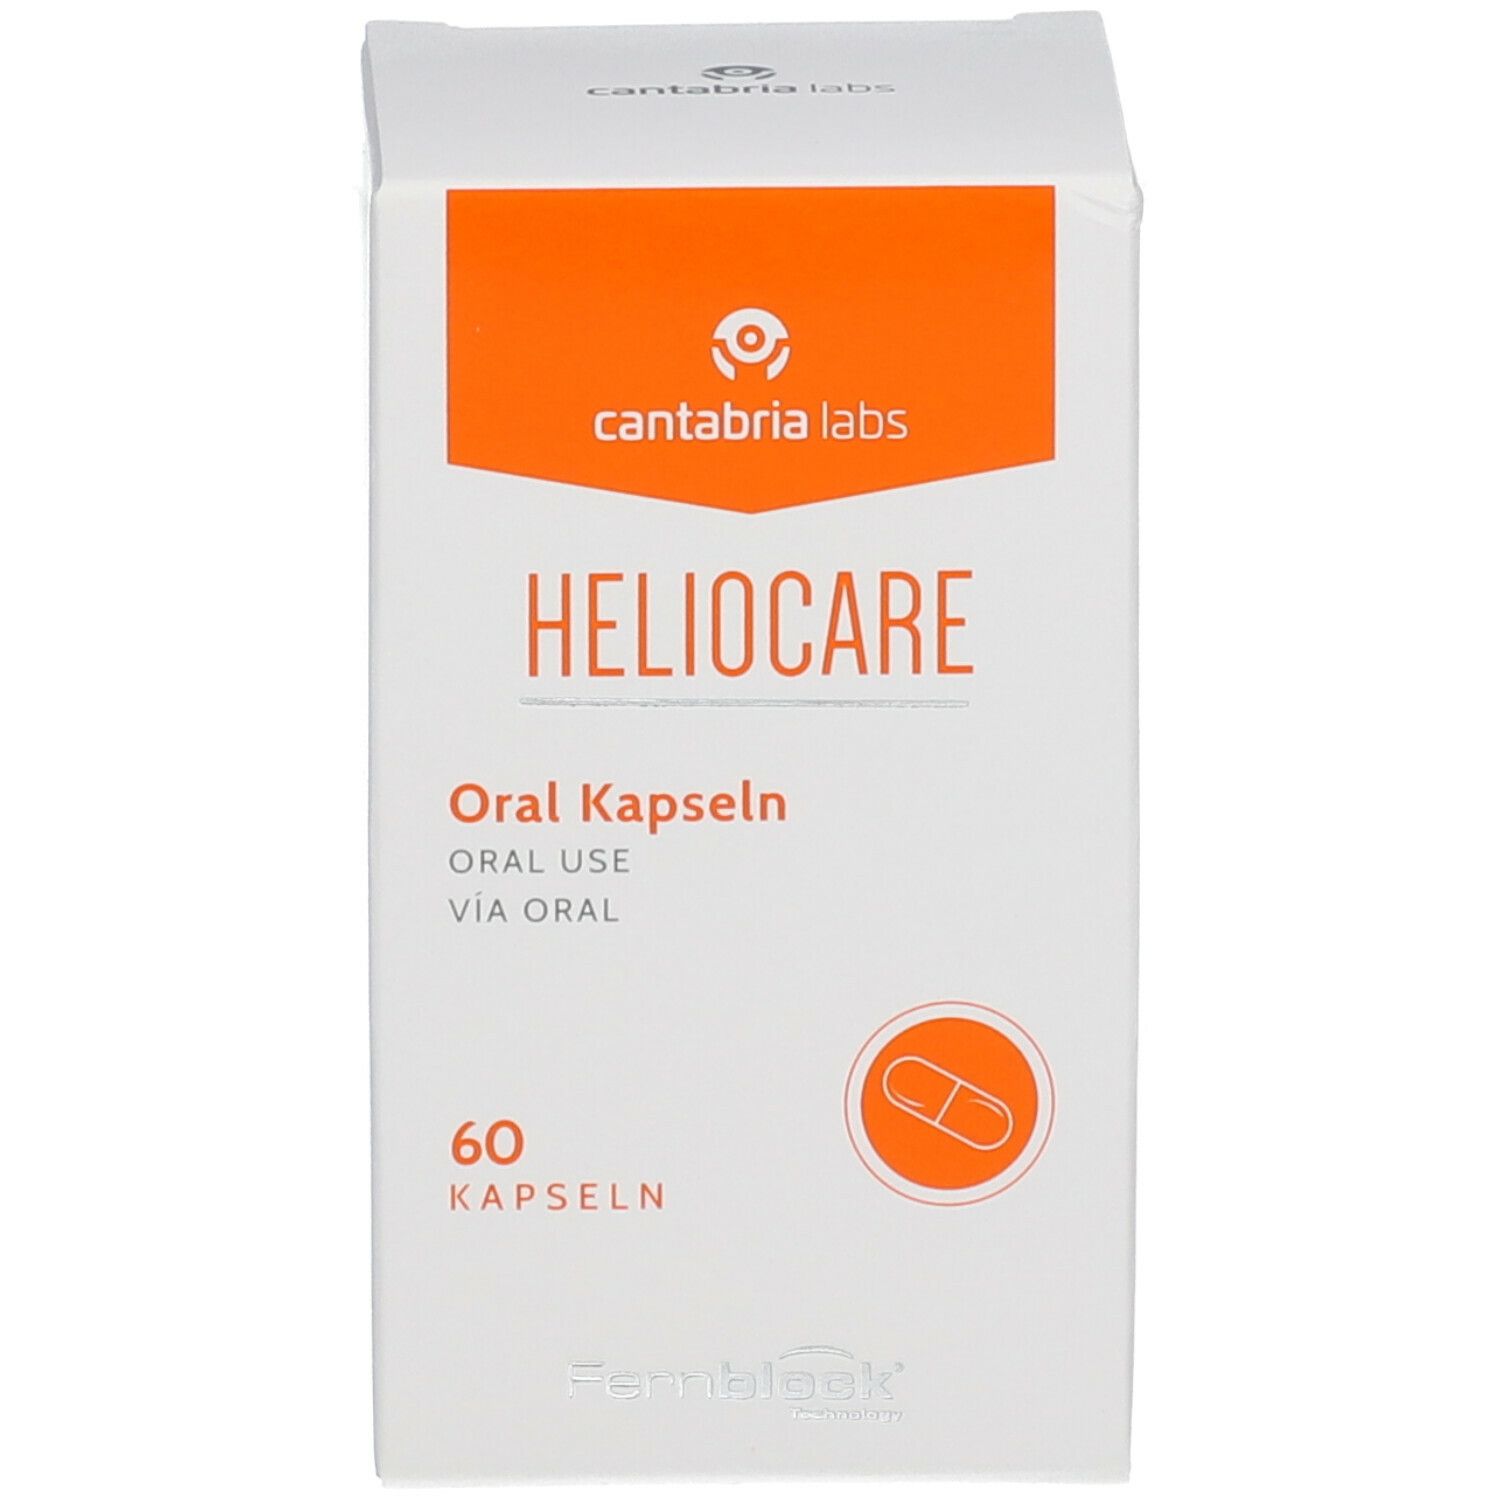 HELIOCARE® Oral Kapseln